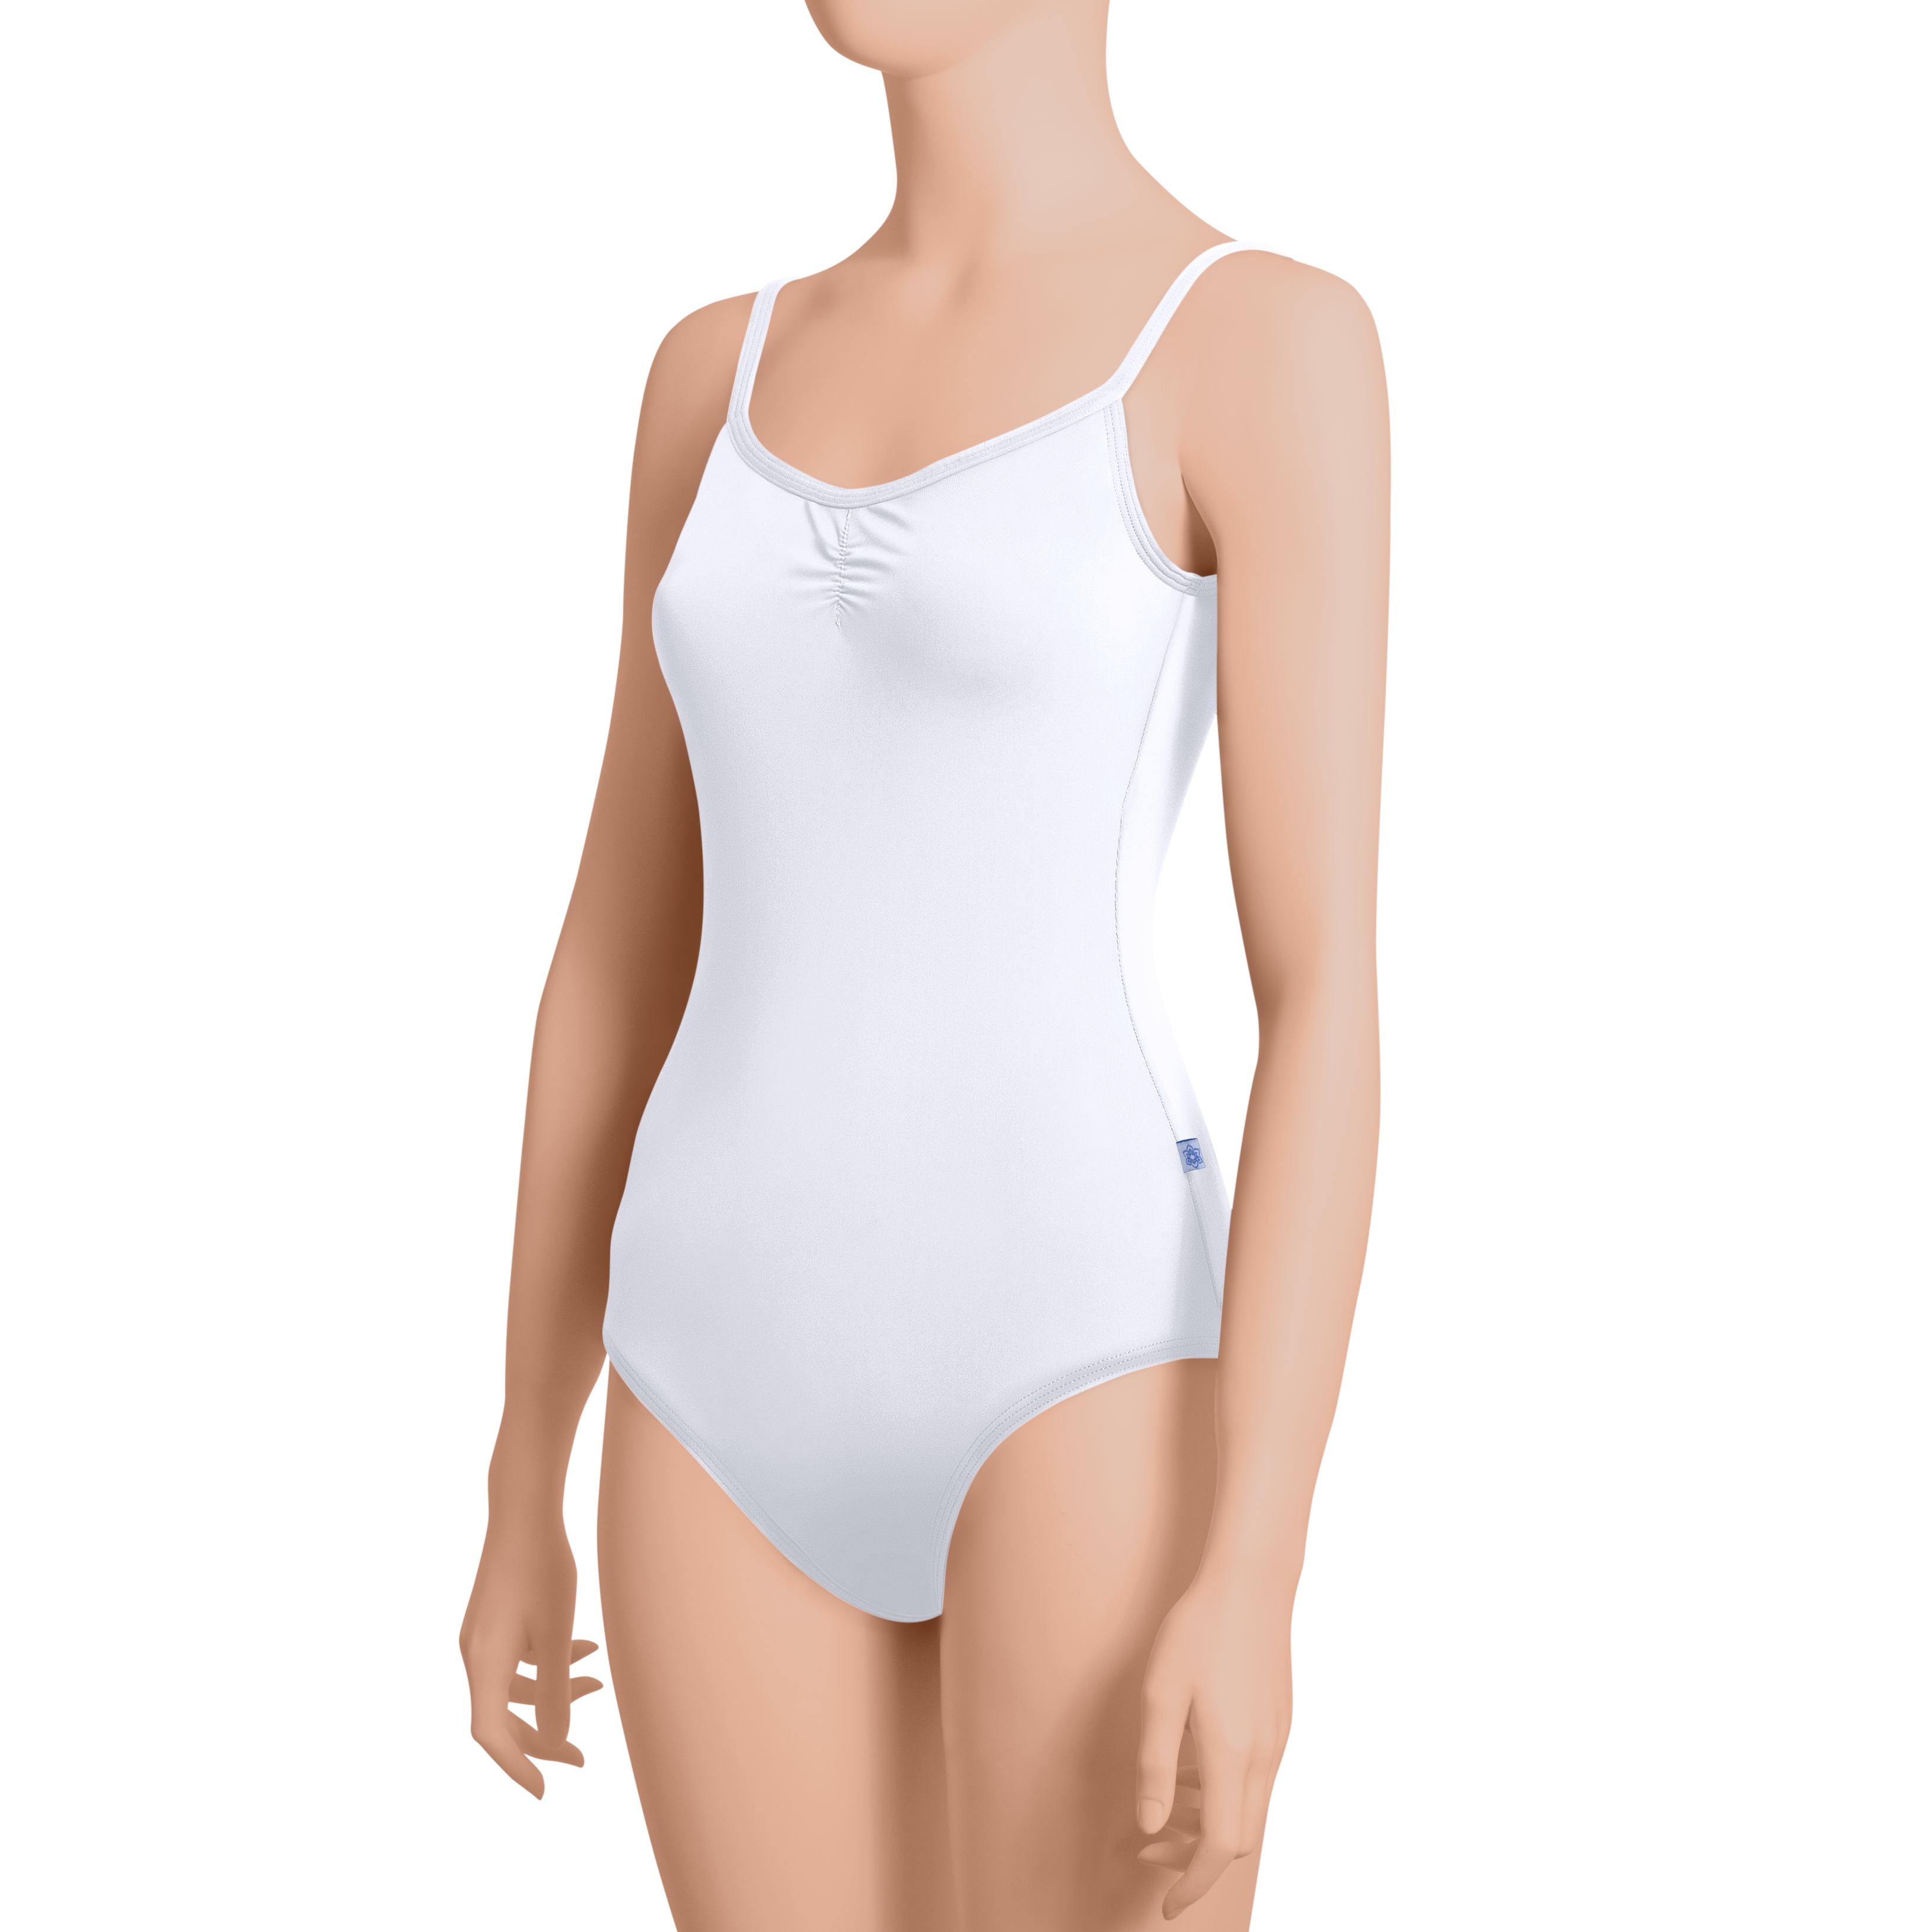 Camisole Leotard with Pinched Front - Adult